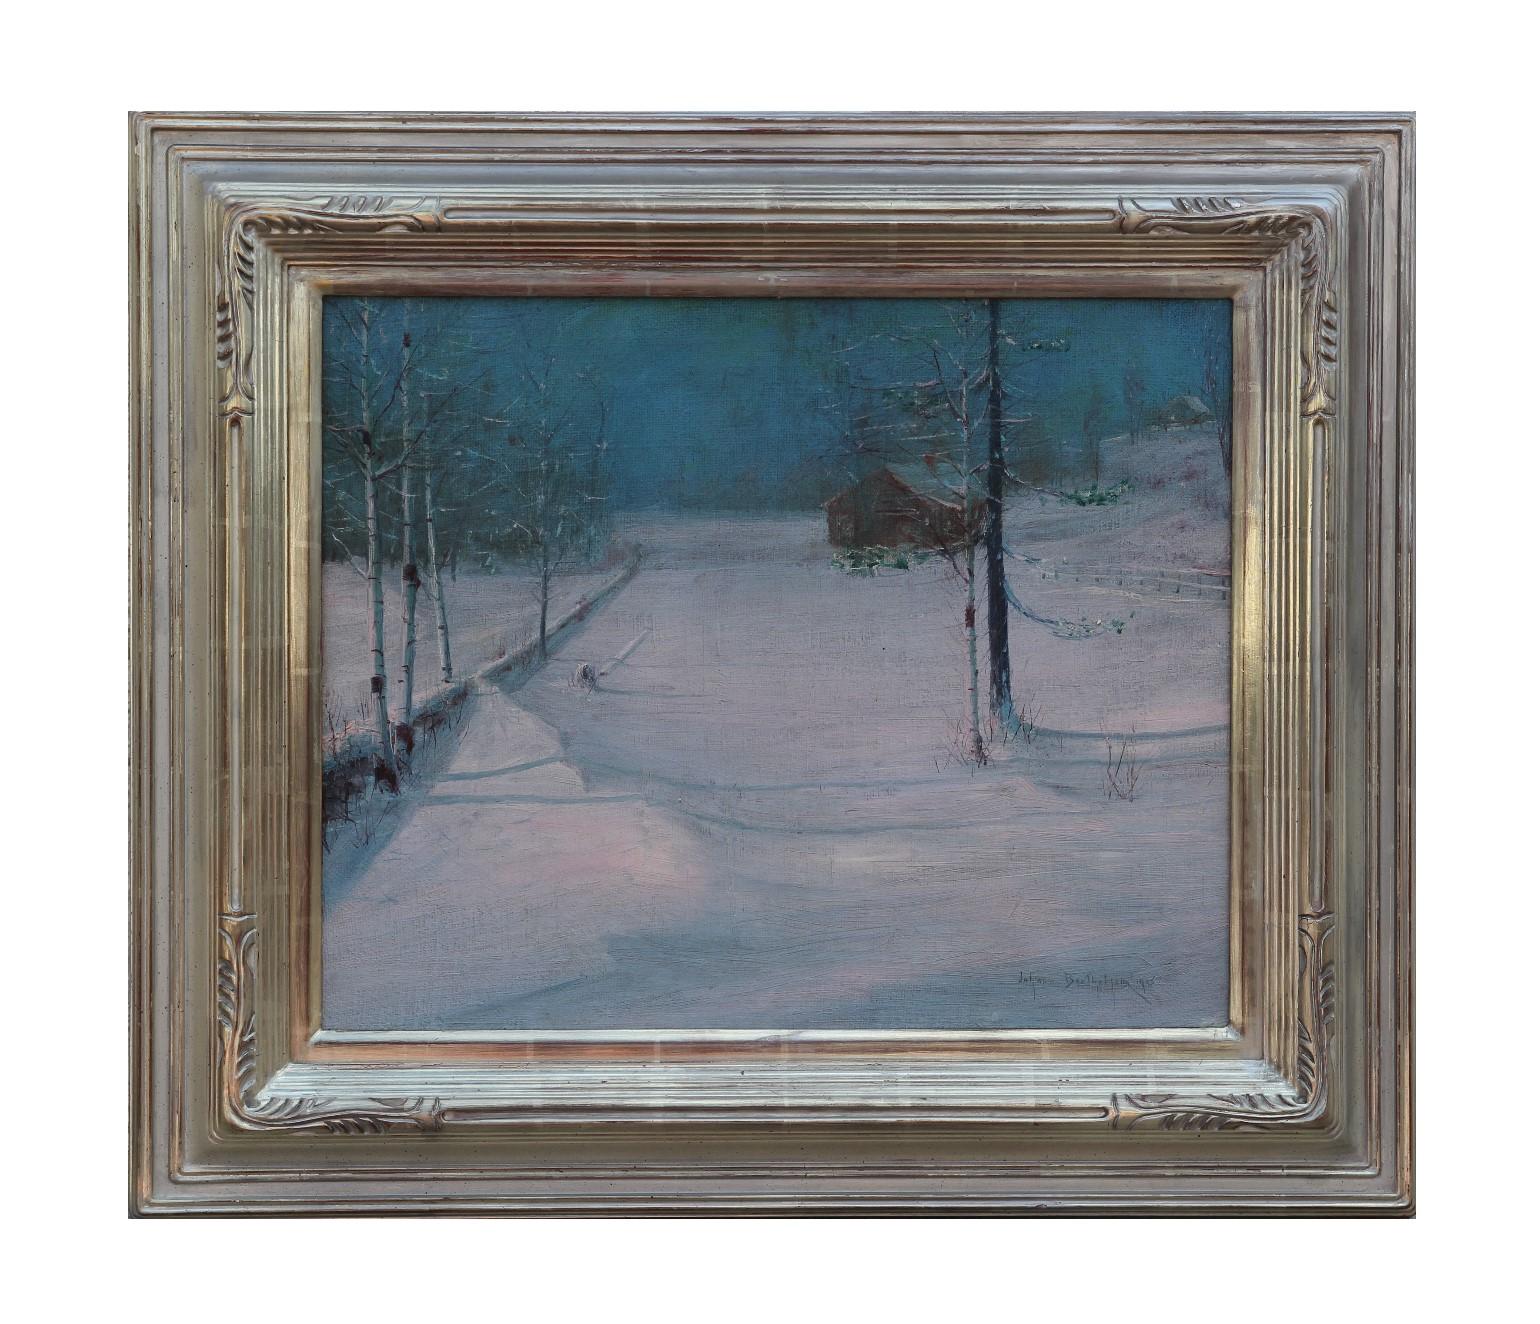 Winter landscape painting with a barn and bare trees. The work is framed in a hand made the frame. it is signed by the artist in the bottom right corner. 1 of 3 paintings known in existence in this style by the artist.
Dimensions without Frame: H